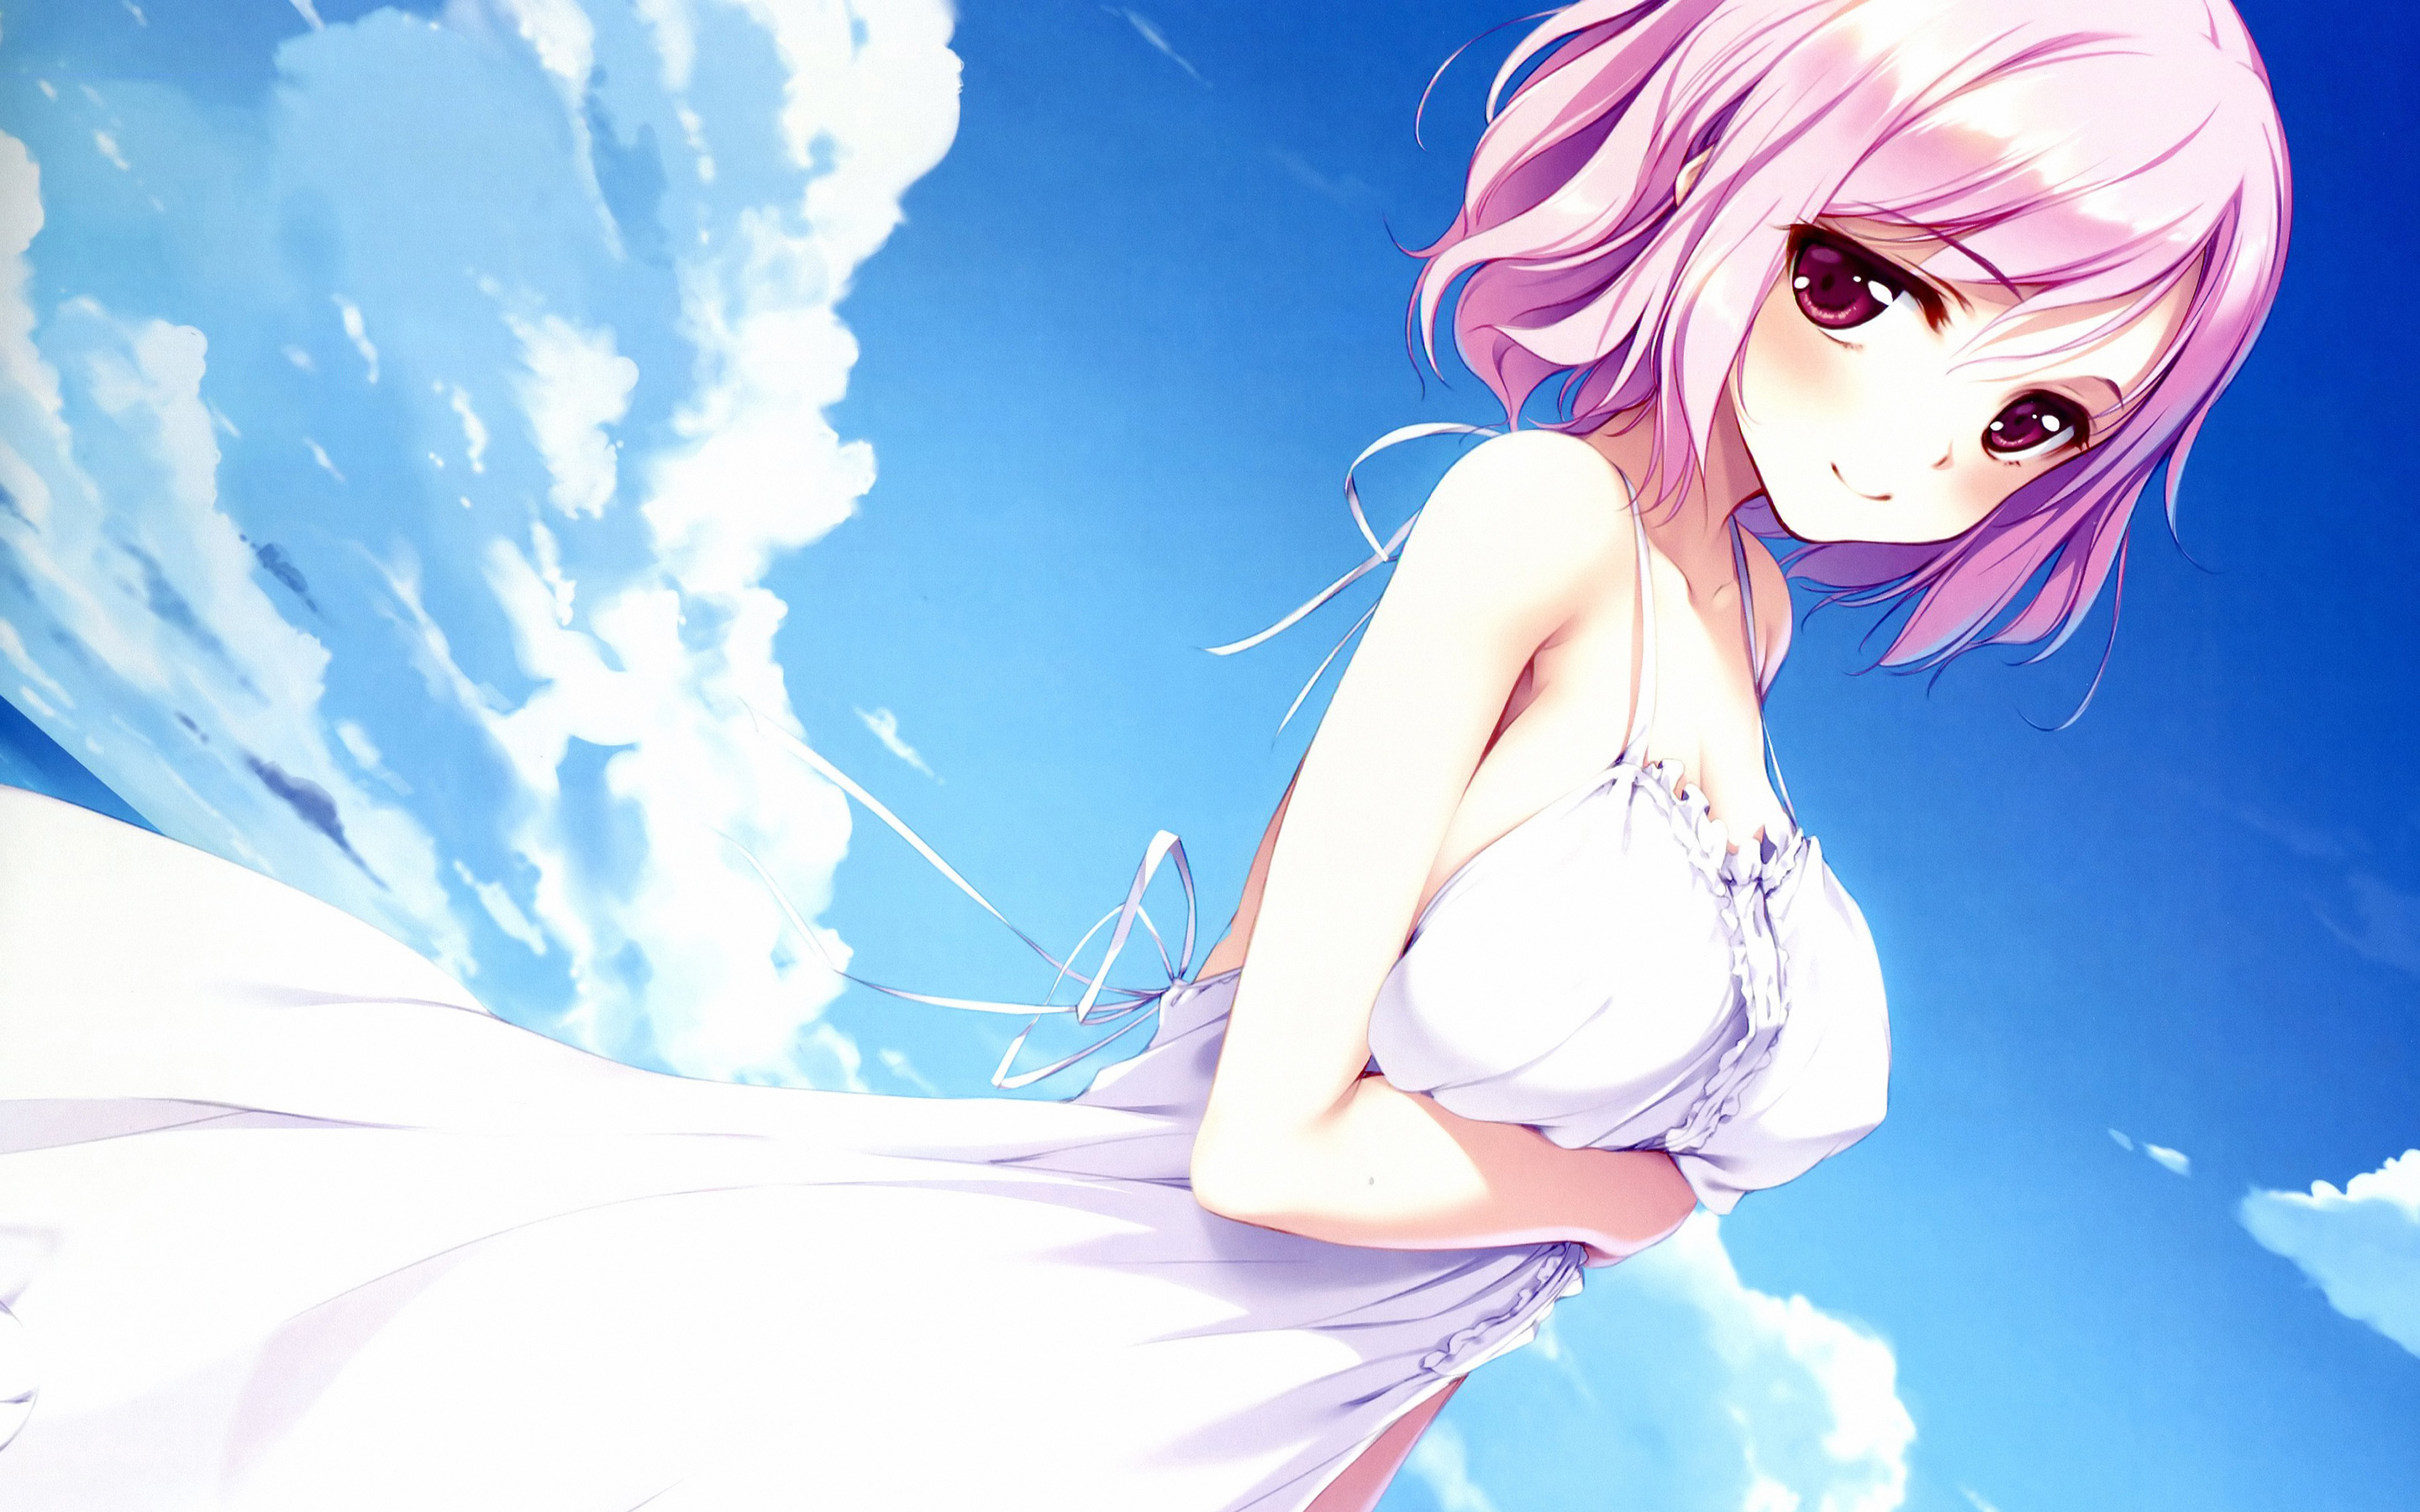 Shy Anime Girl Pink Hair Wallpapers and Free Stock Photos.